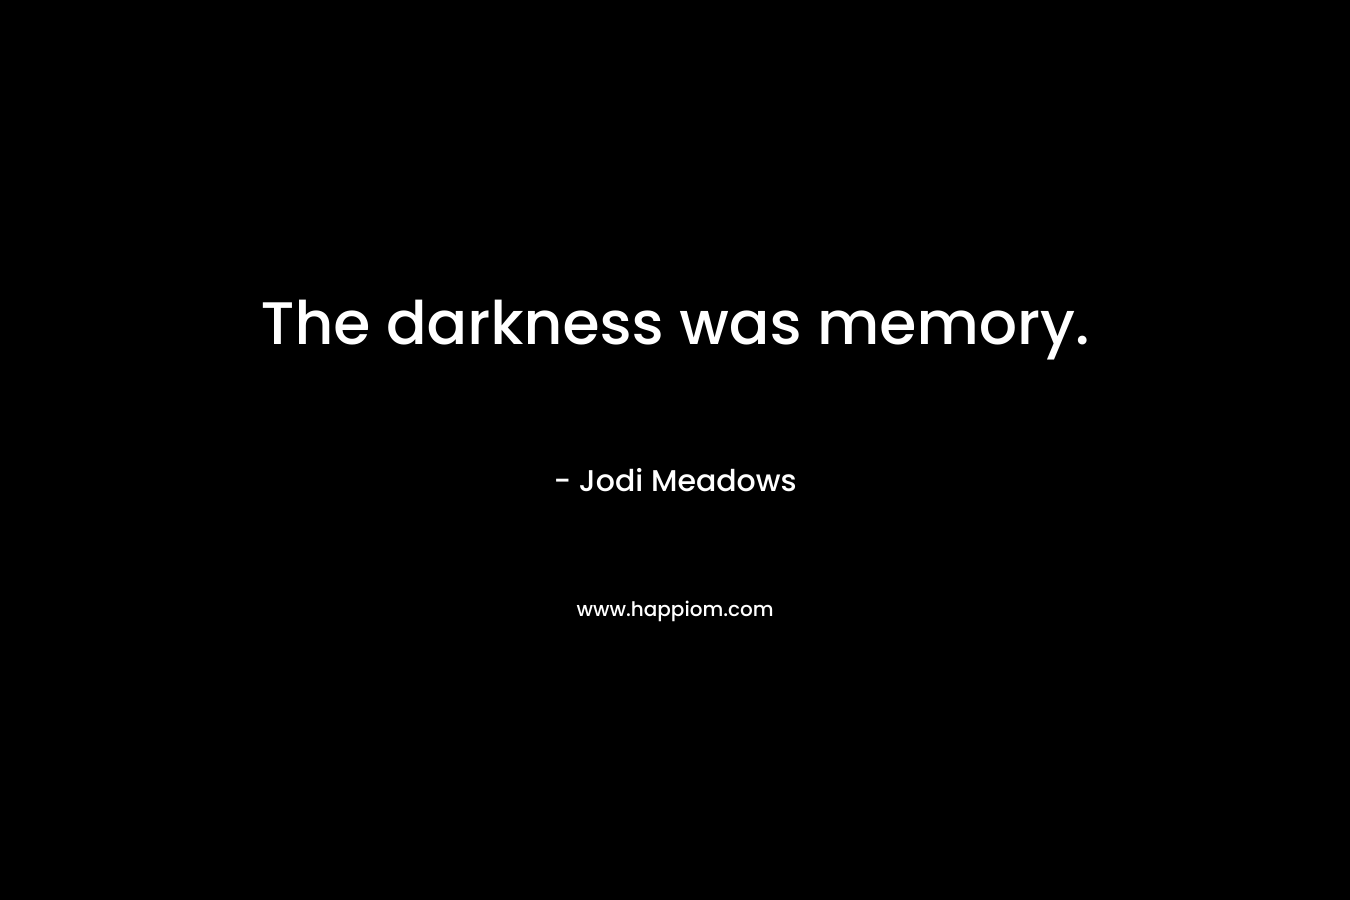 The darkness was memory.